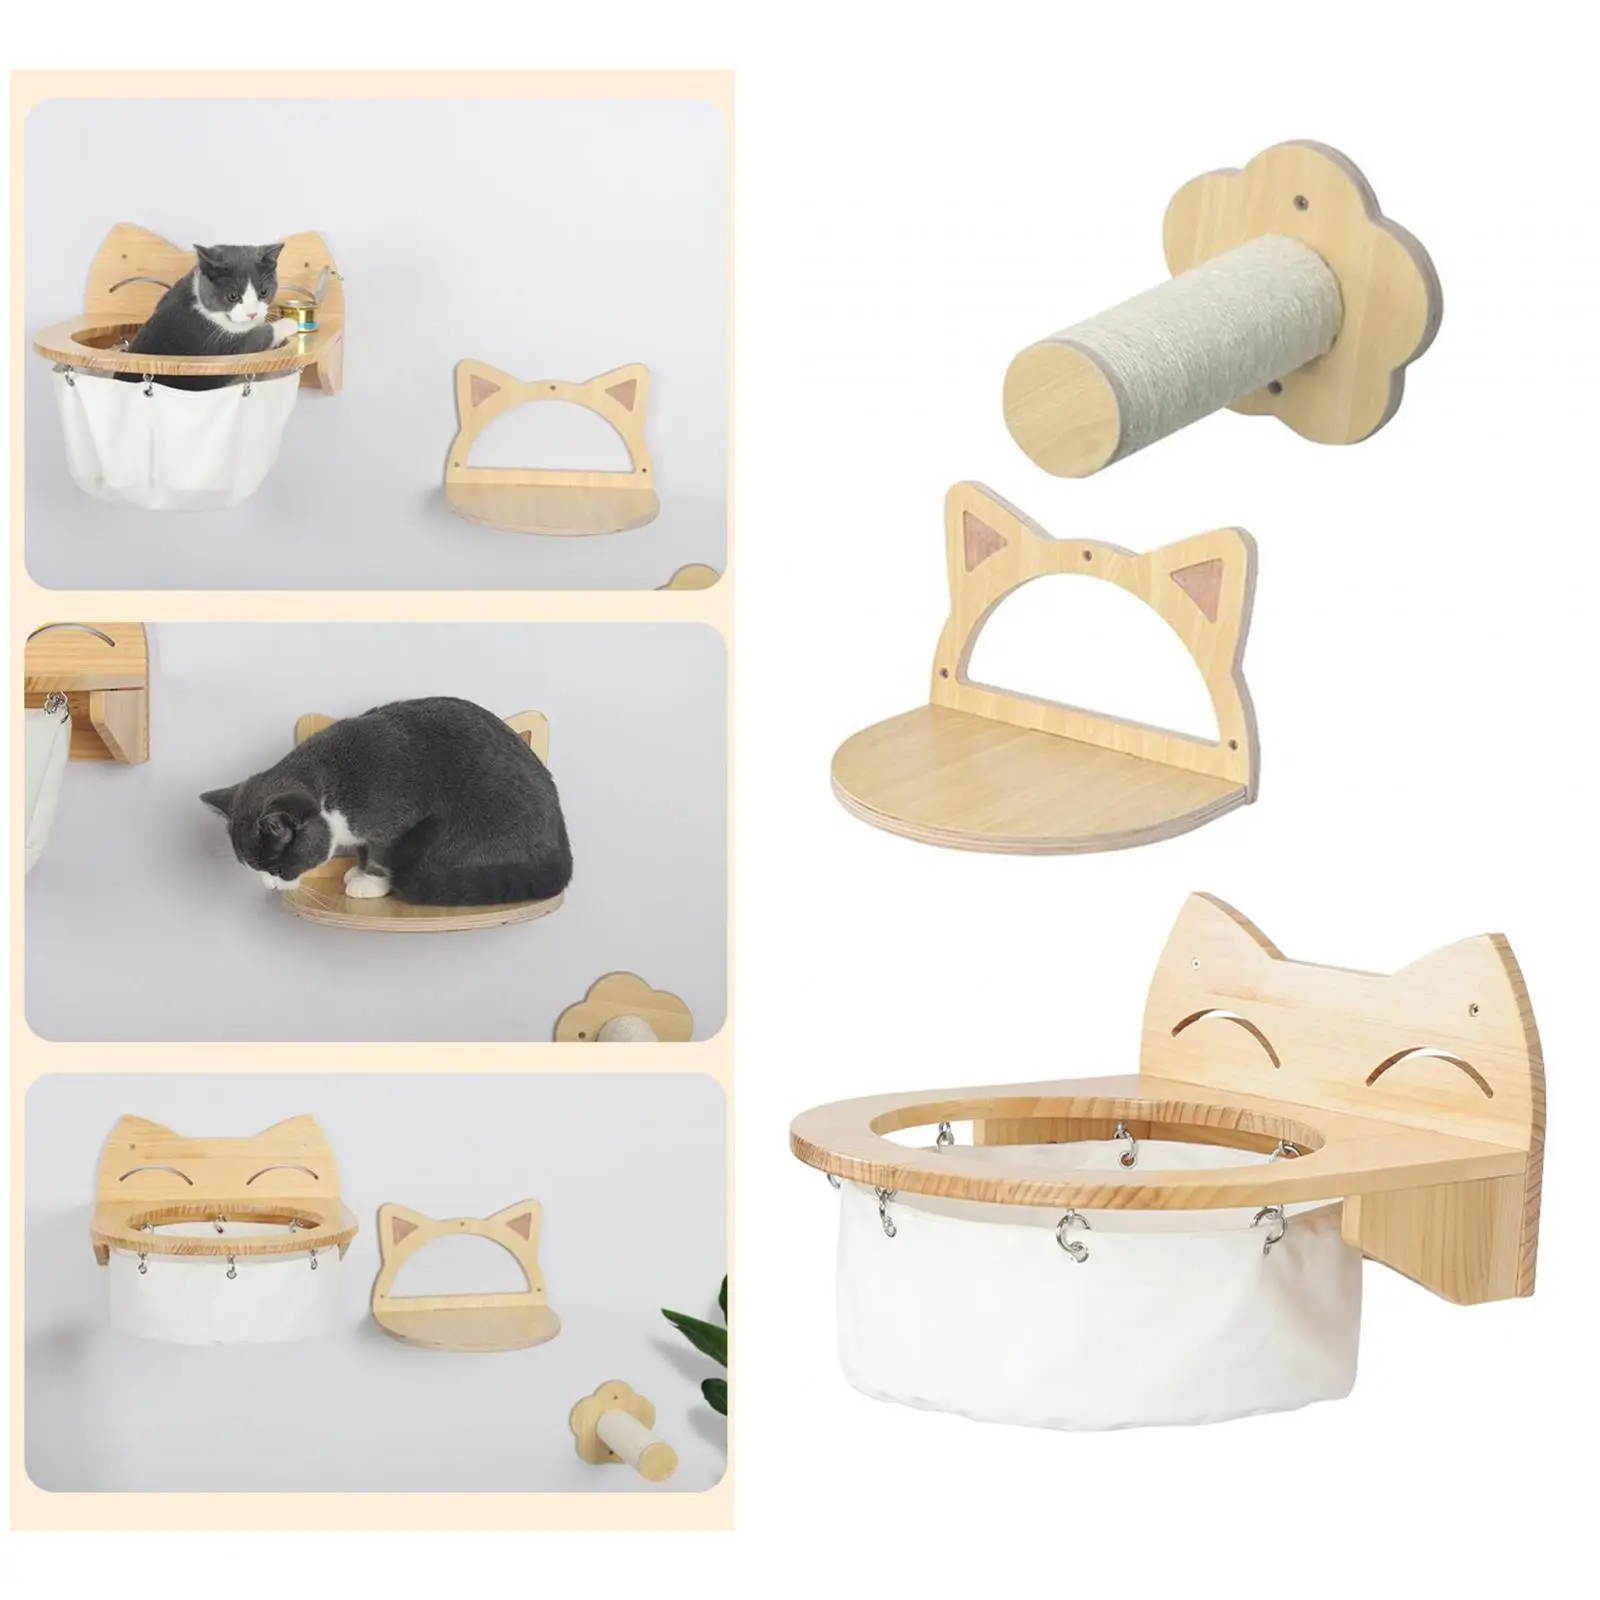 3x Activity Centre Cat Hanging Bed Cat Perch Hammock Sturdy Cats Wall Furniture, Shelves, Floating Cats Wall Climbing Frame Set